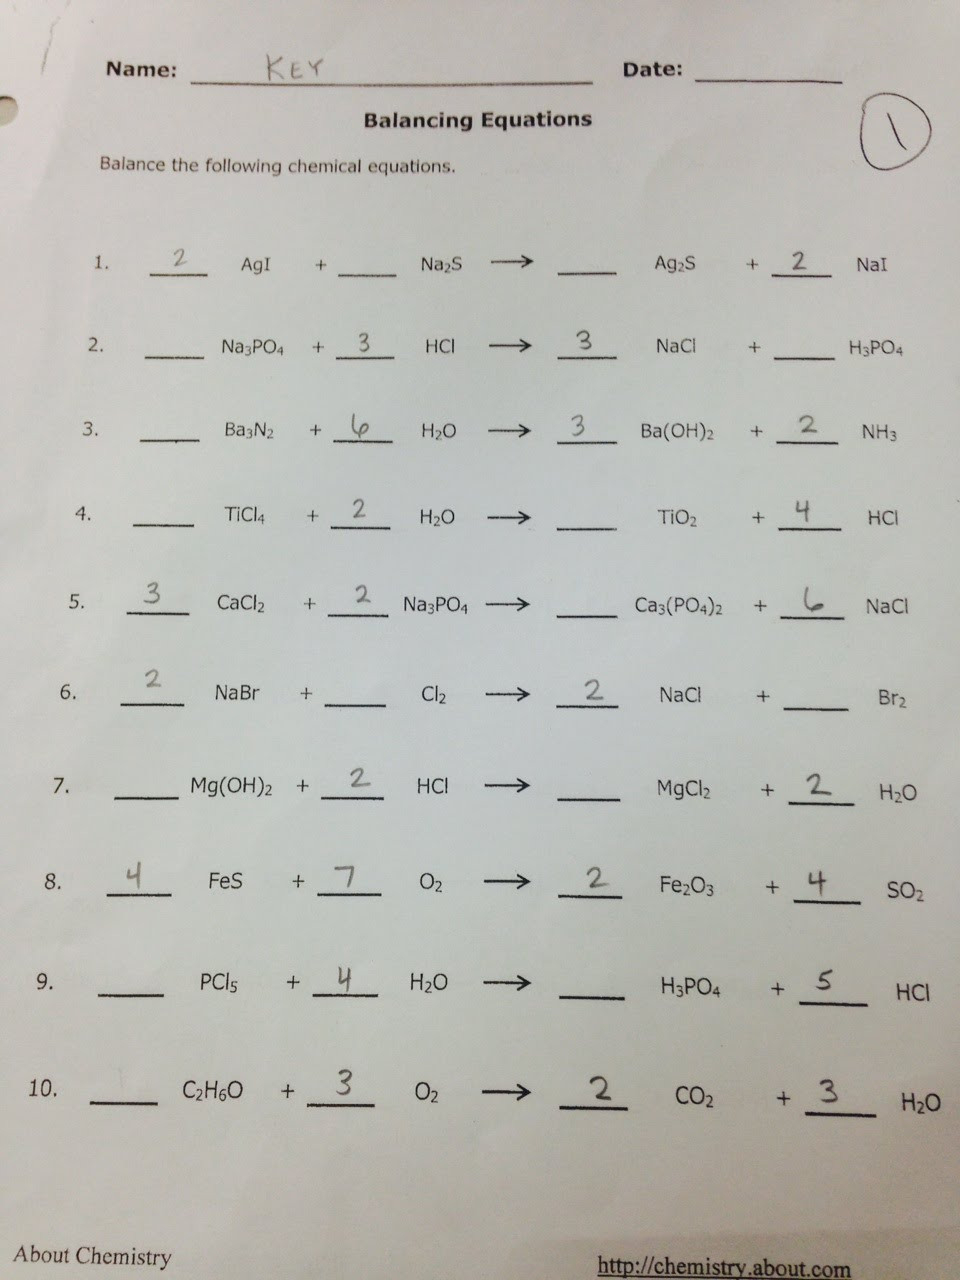 Physical Science If8767 Worksheet Answers  Yooob